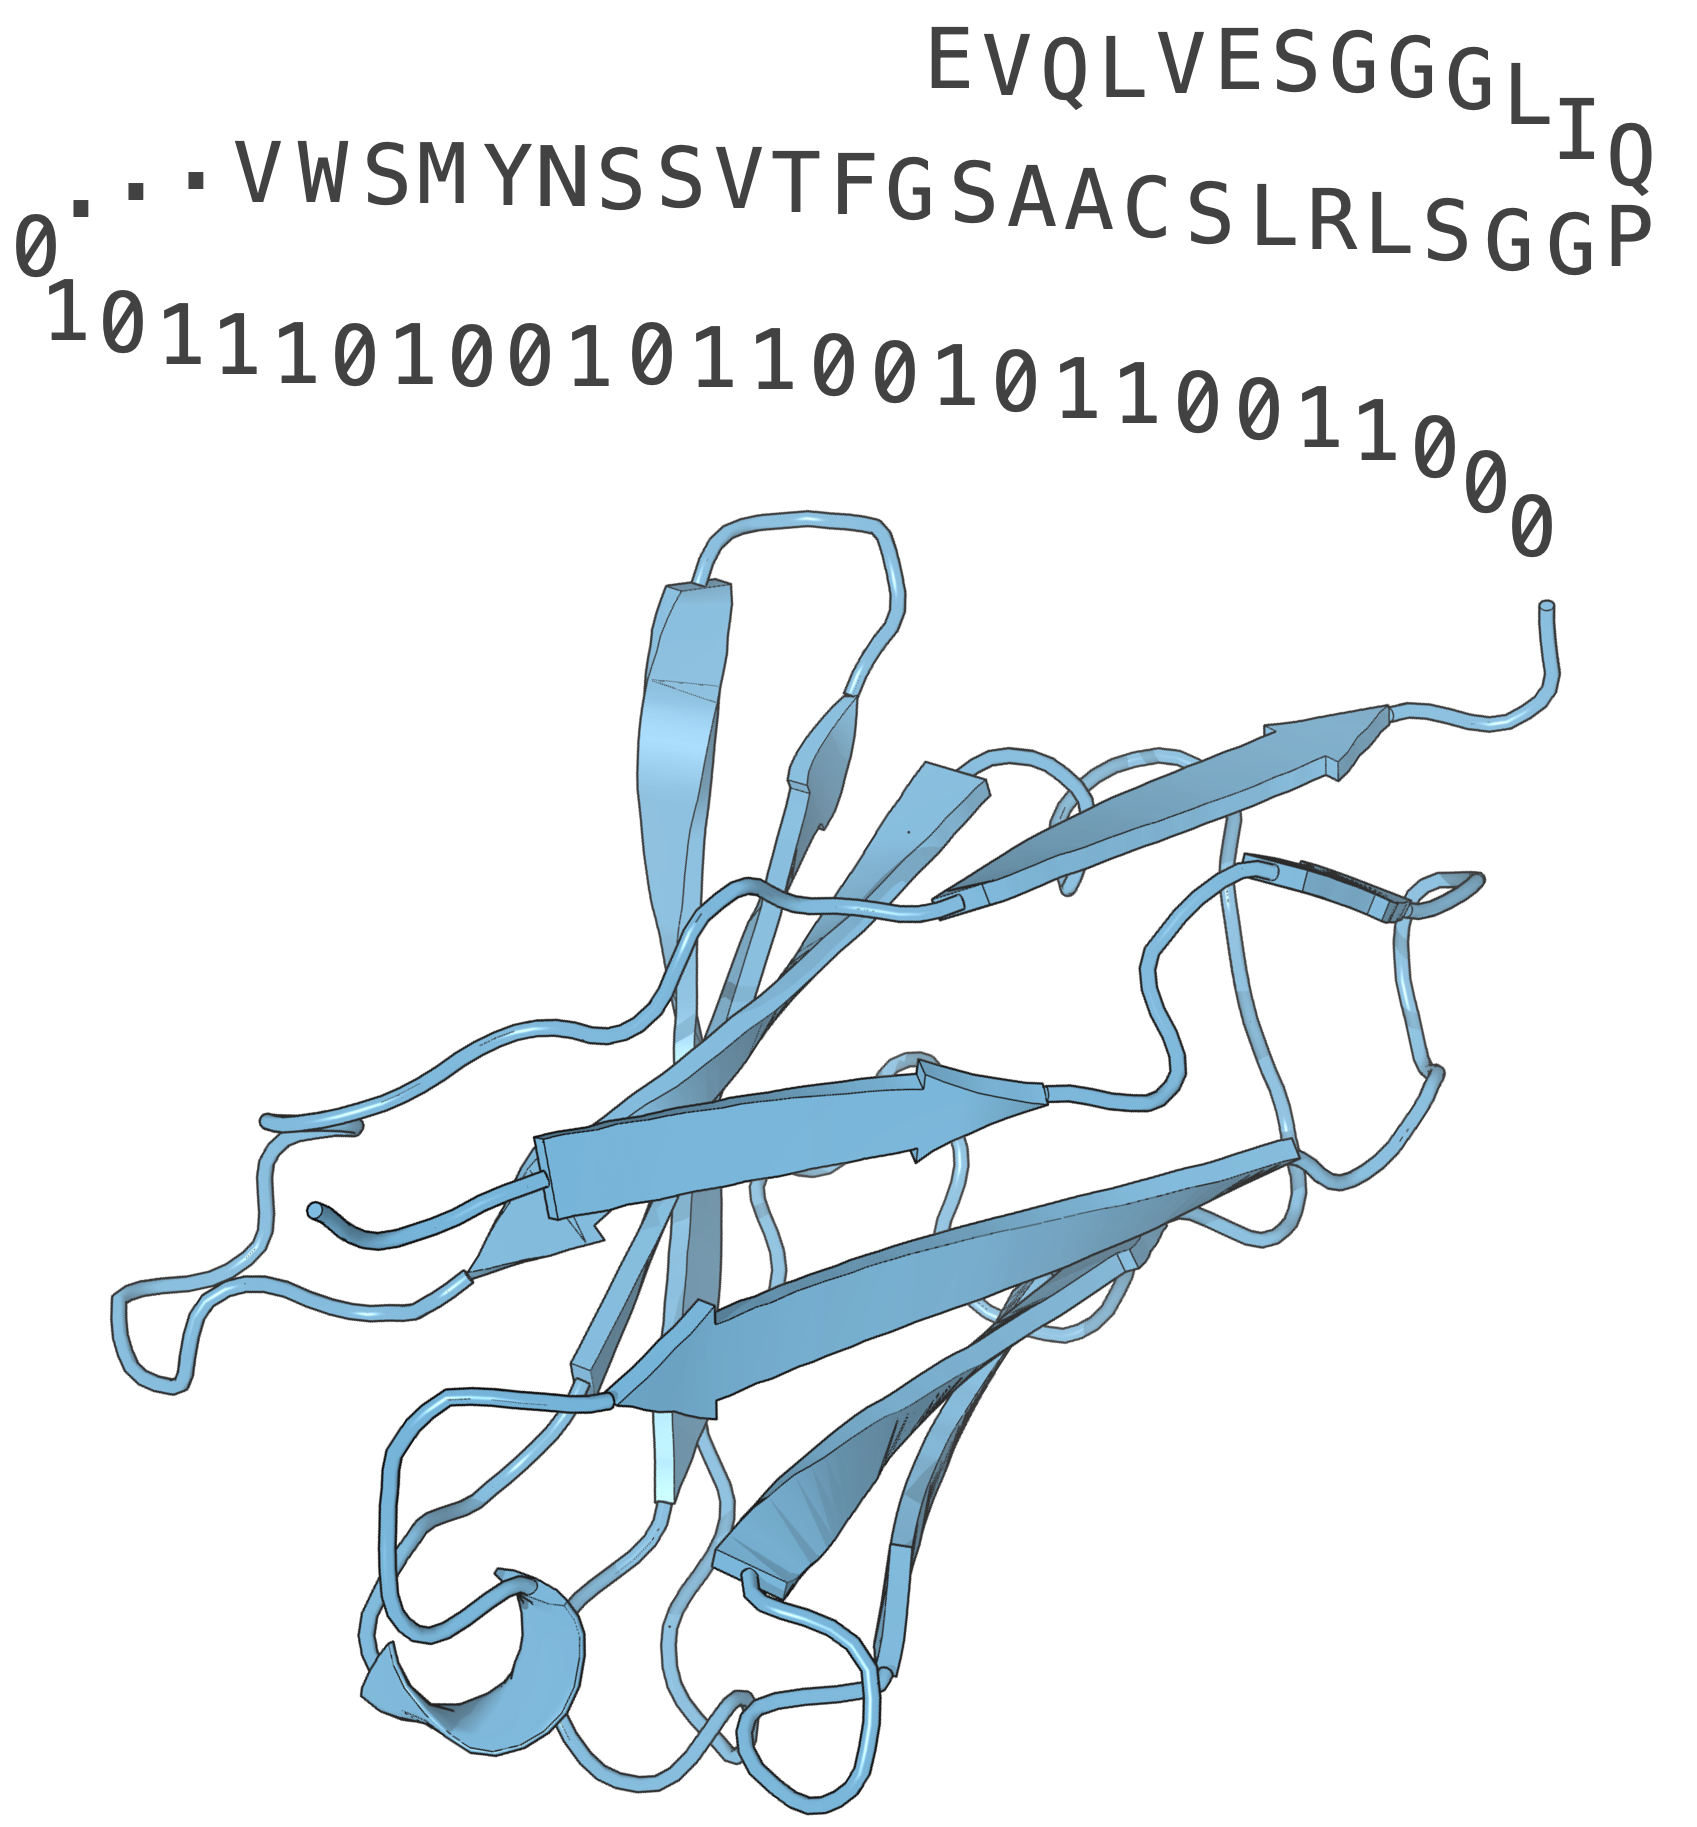 Antibody sequence to bits to structure